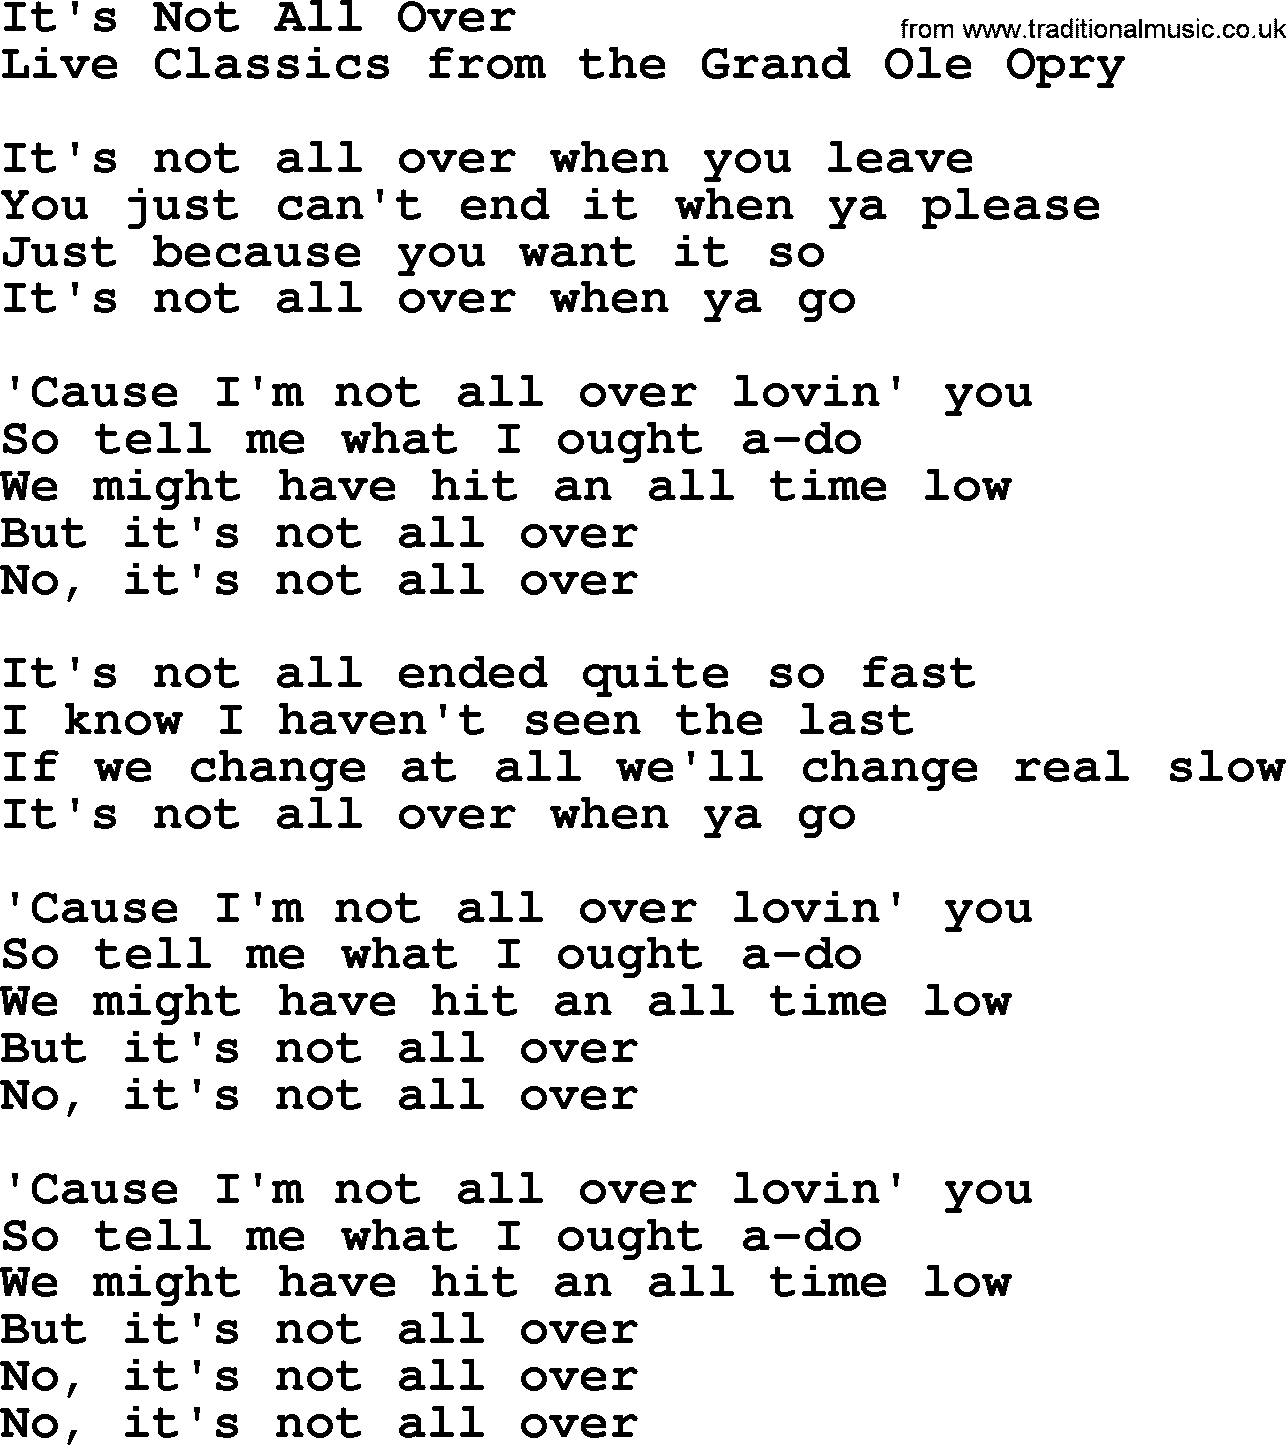 Marty Robbins song: It's Not All Over, lyrics